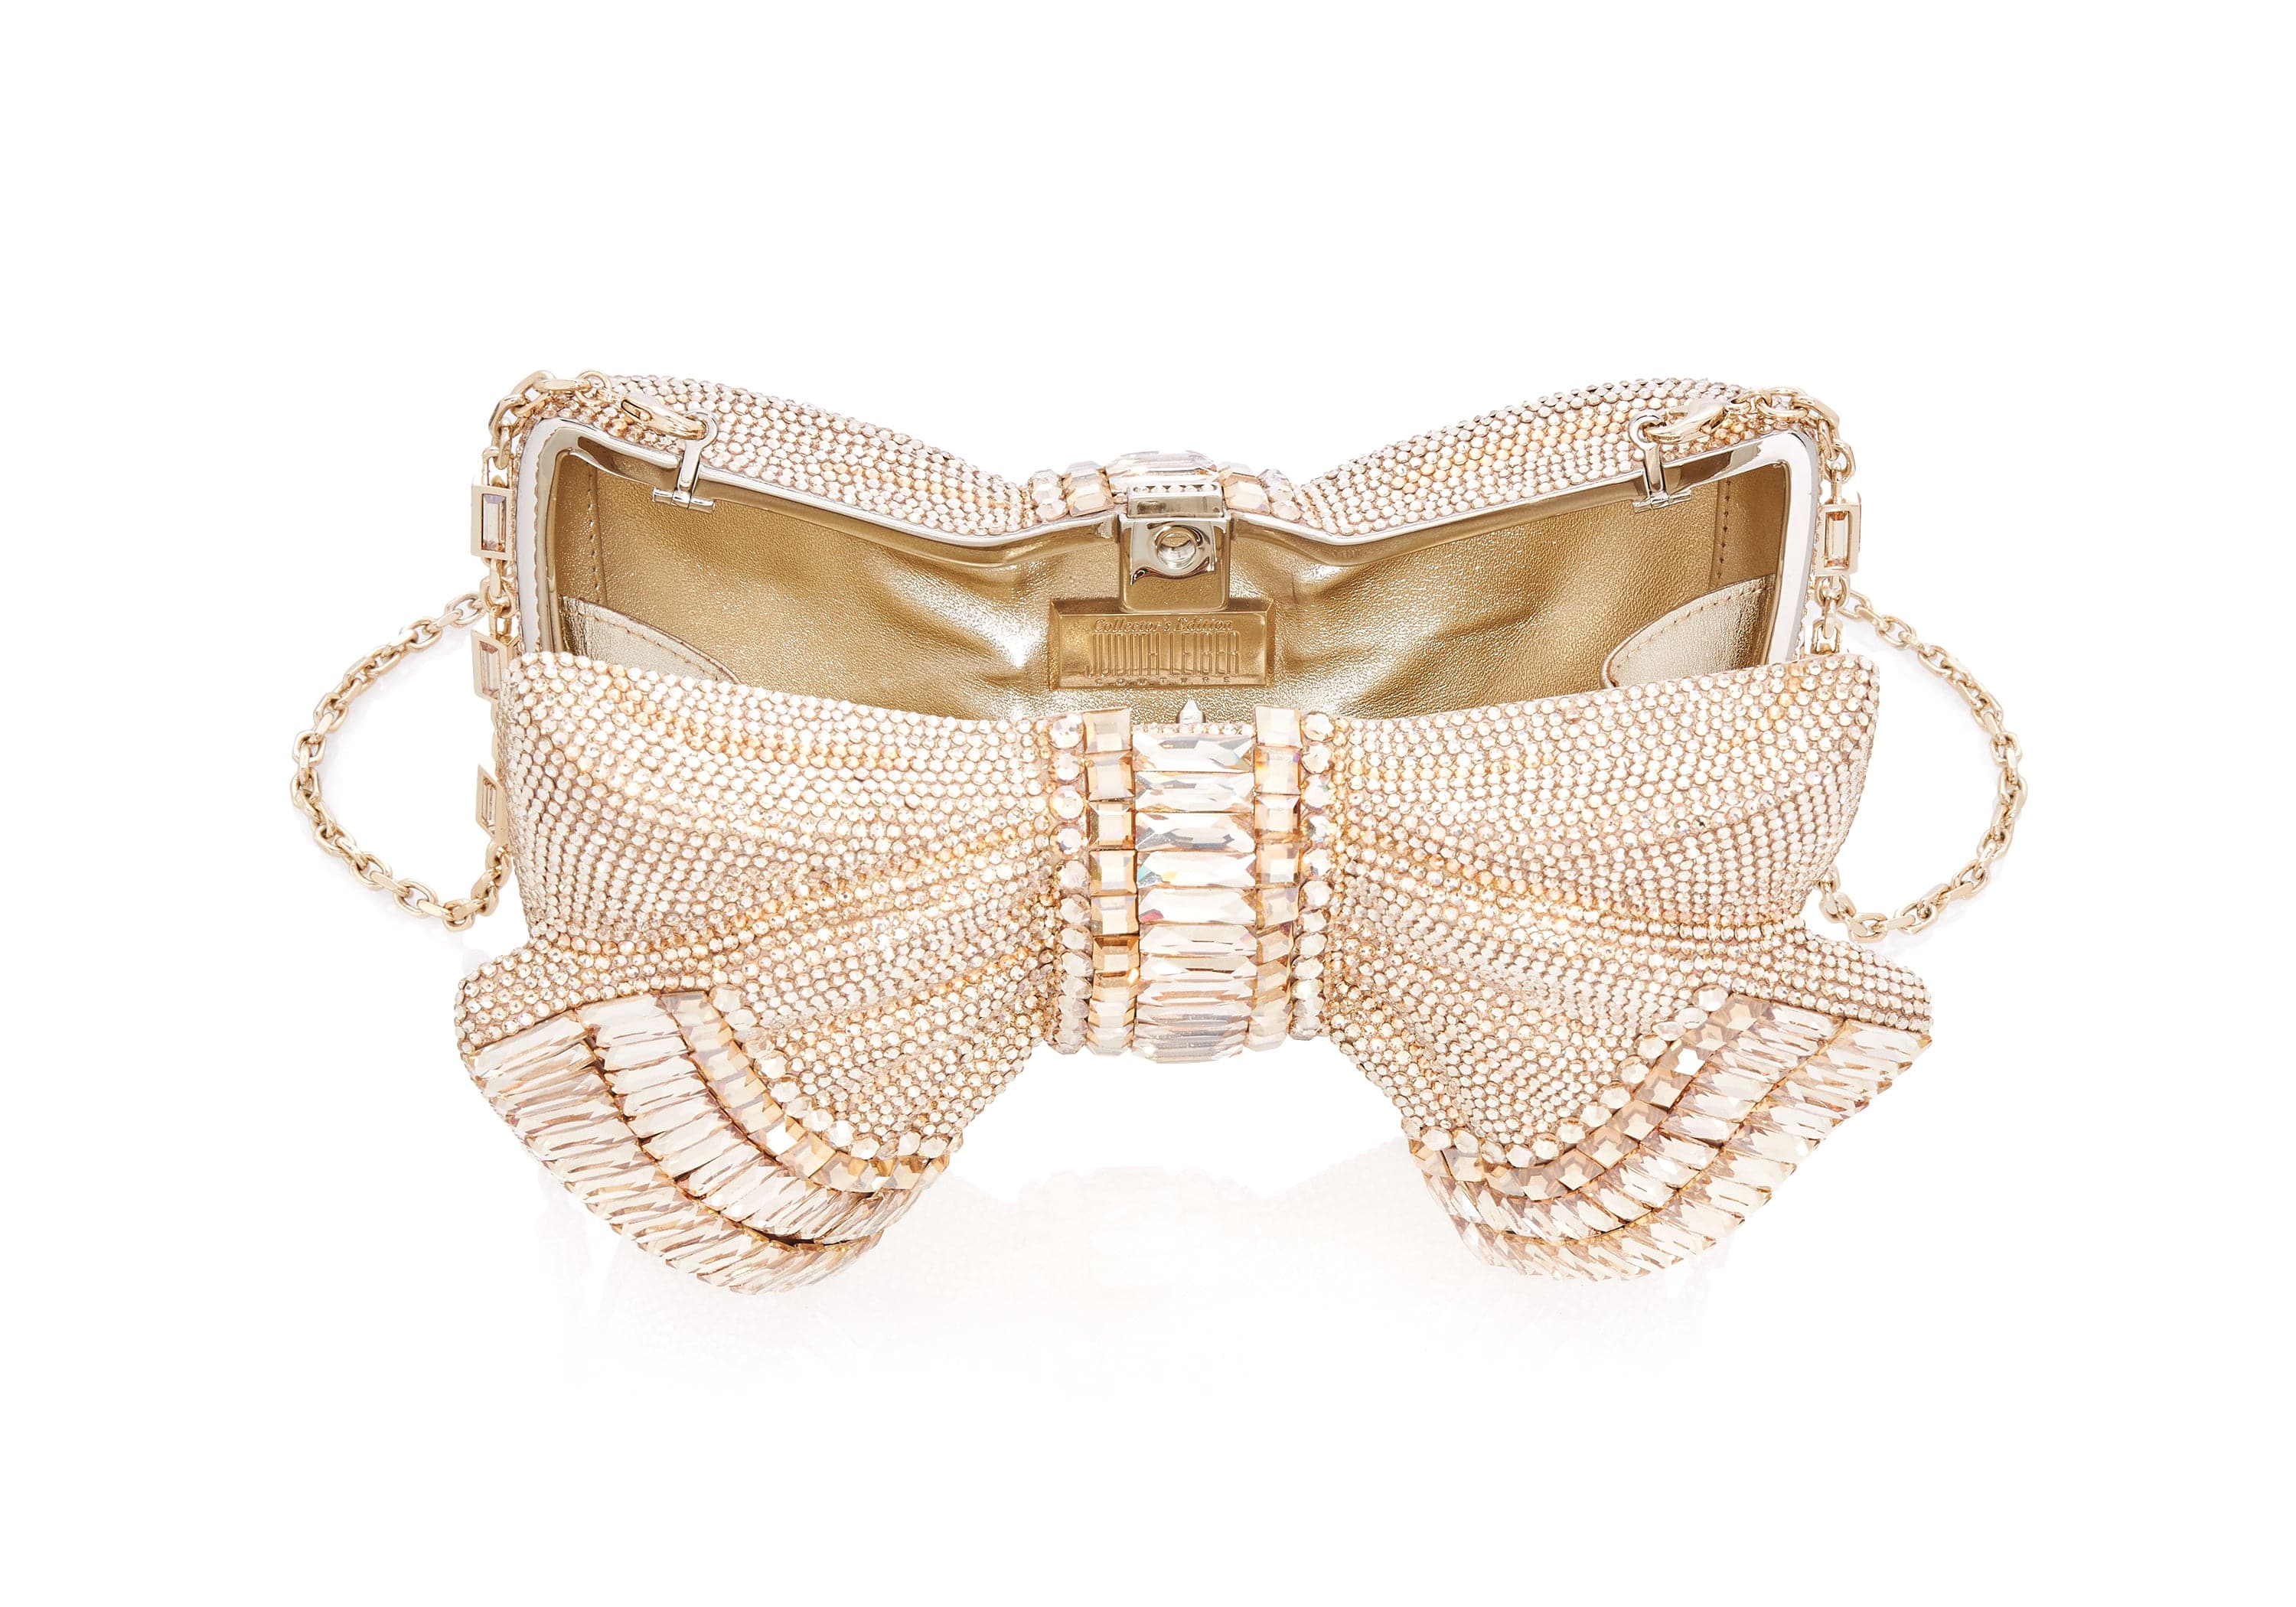 Judith Leiber Couture Crystal Bow Clutch Bag